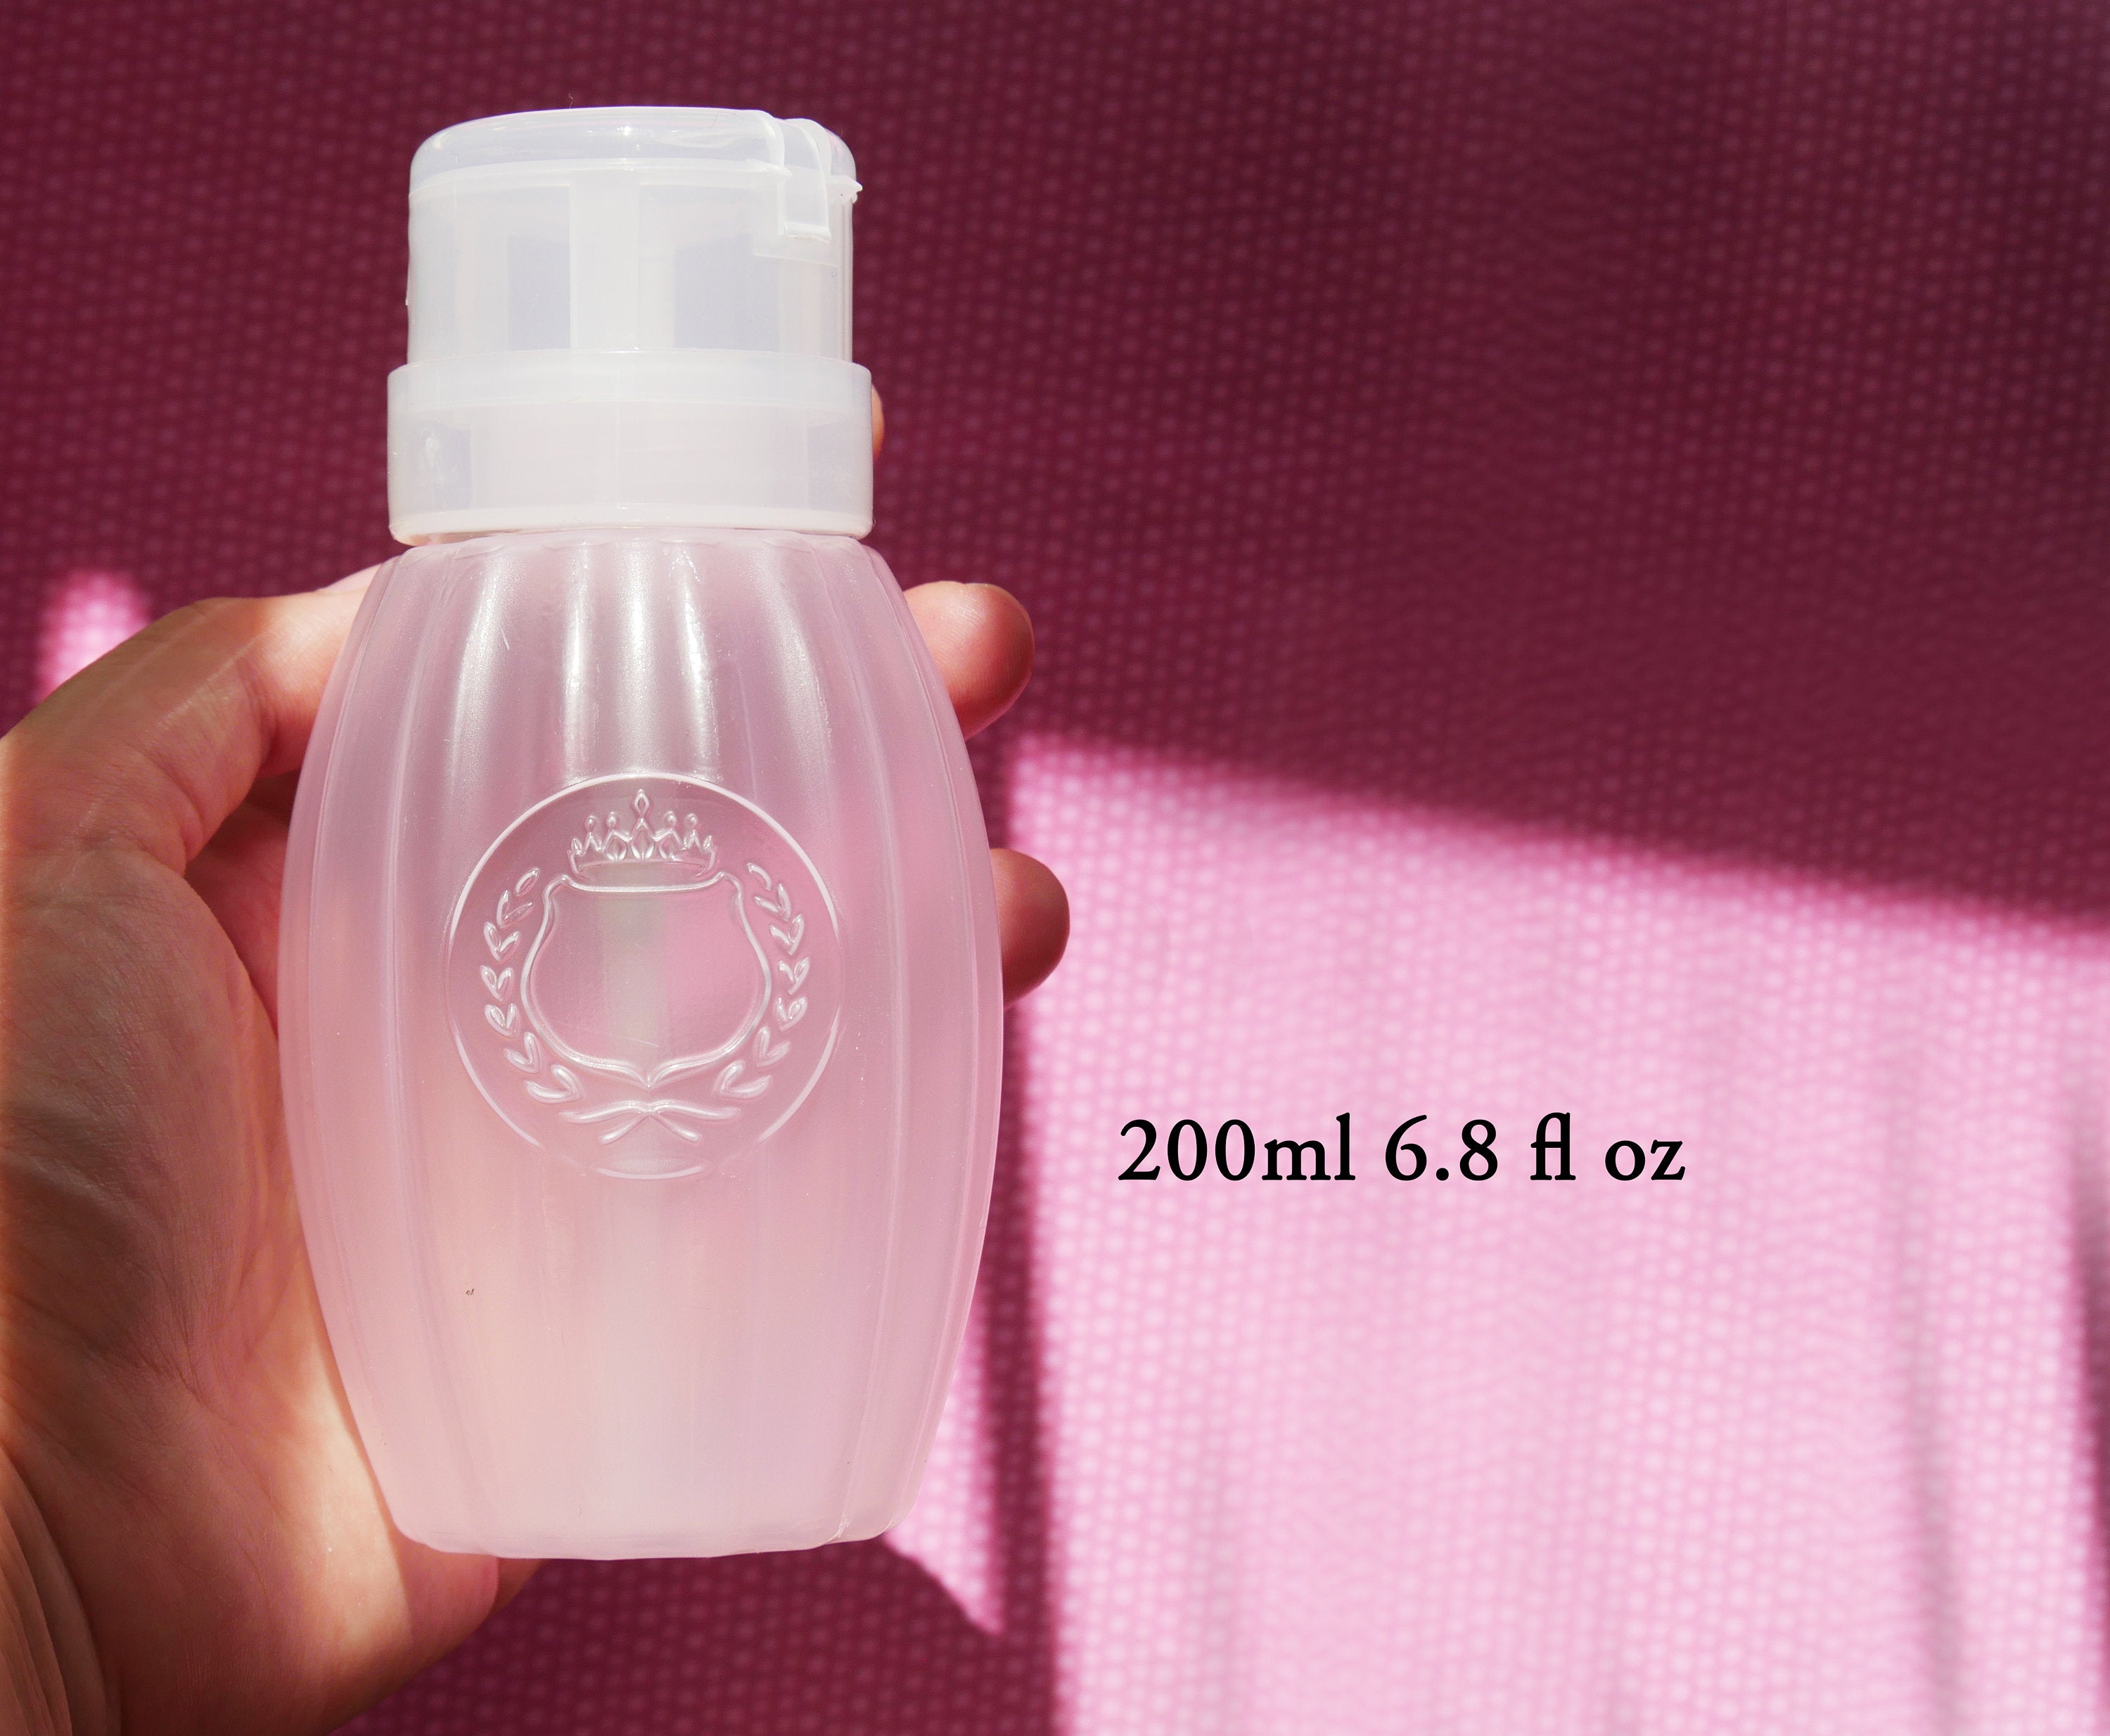 100ml/200ml Pump Dispenser Bottle Push-type Bottling for Liquid Nail Polish  Make Up Remover – the best products in the Joom Geek online store